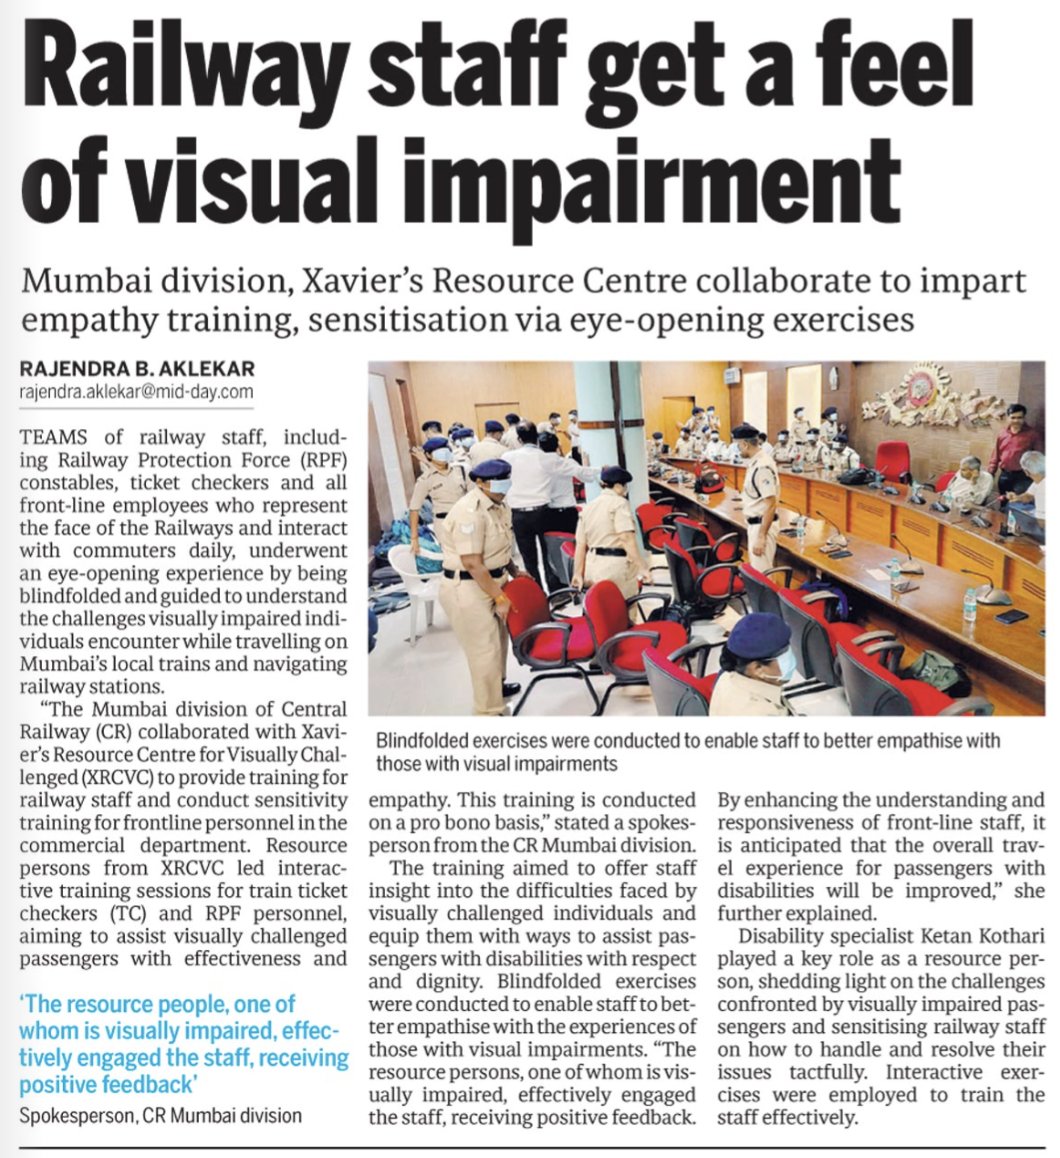 Blind-folded railway staff made to understand problems of visually impaired on the city’s local trains. Details here: mid-day.com/mumbai/mumbai-… @RailMinIndia